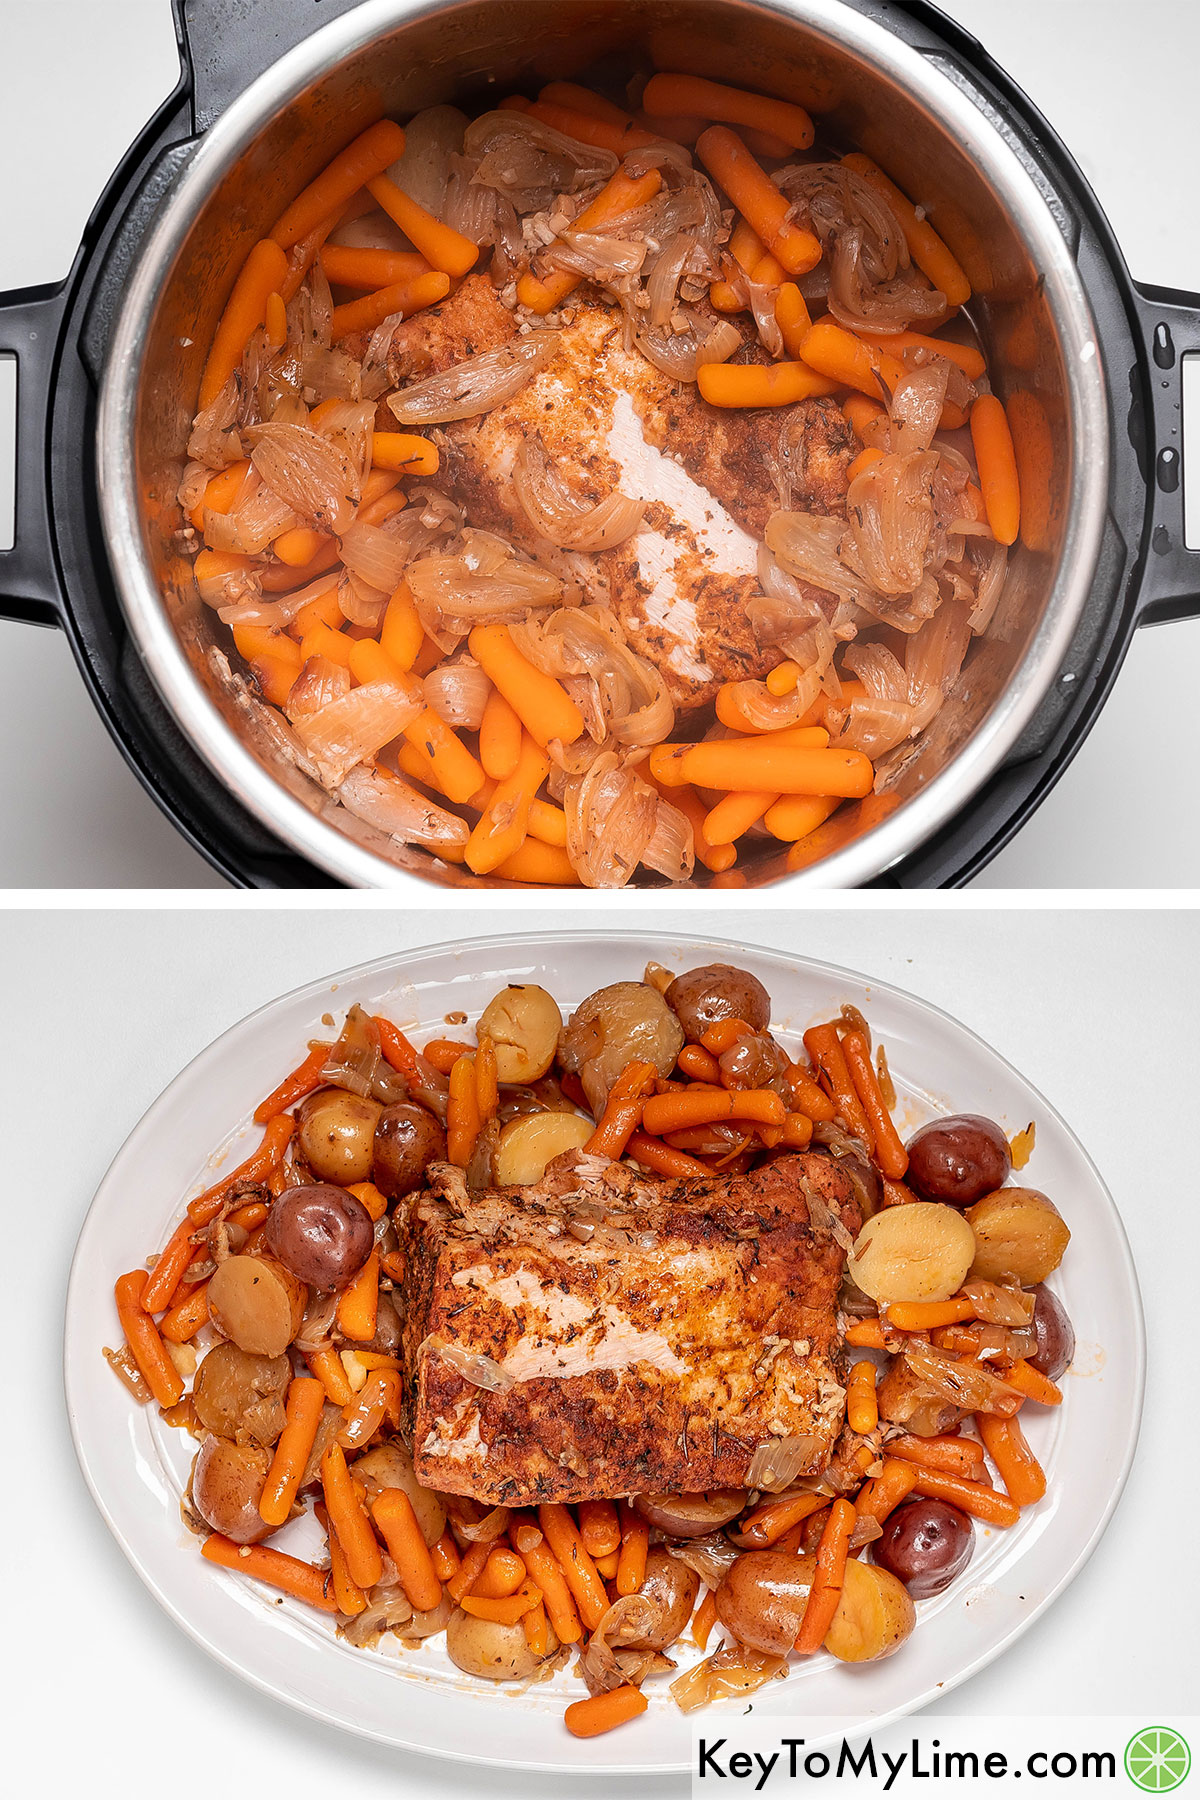 Removing the loin and vegetables from the instant pot and transferring to a large serving plate to cover.